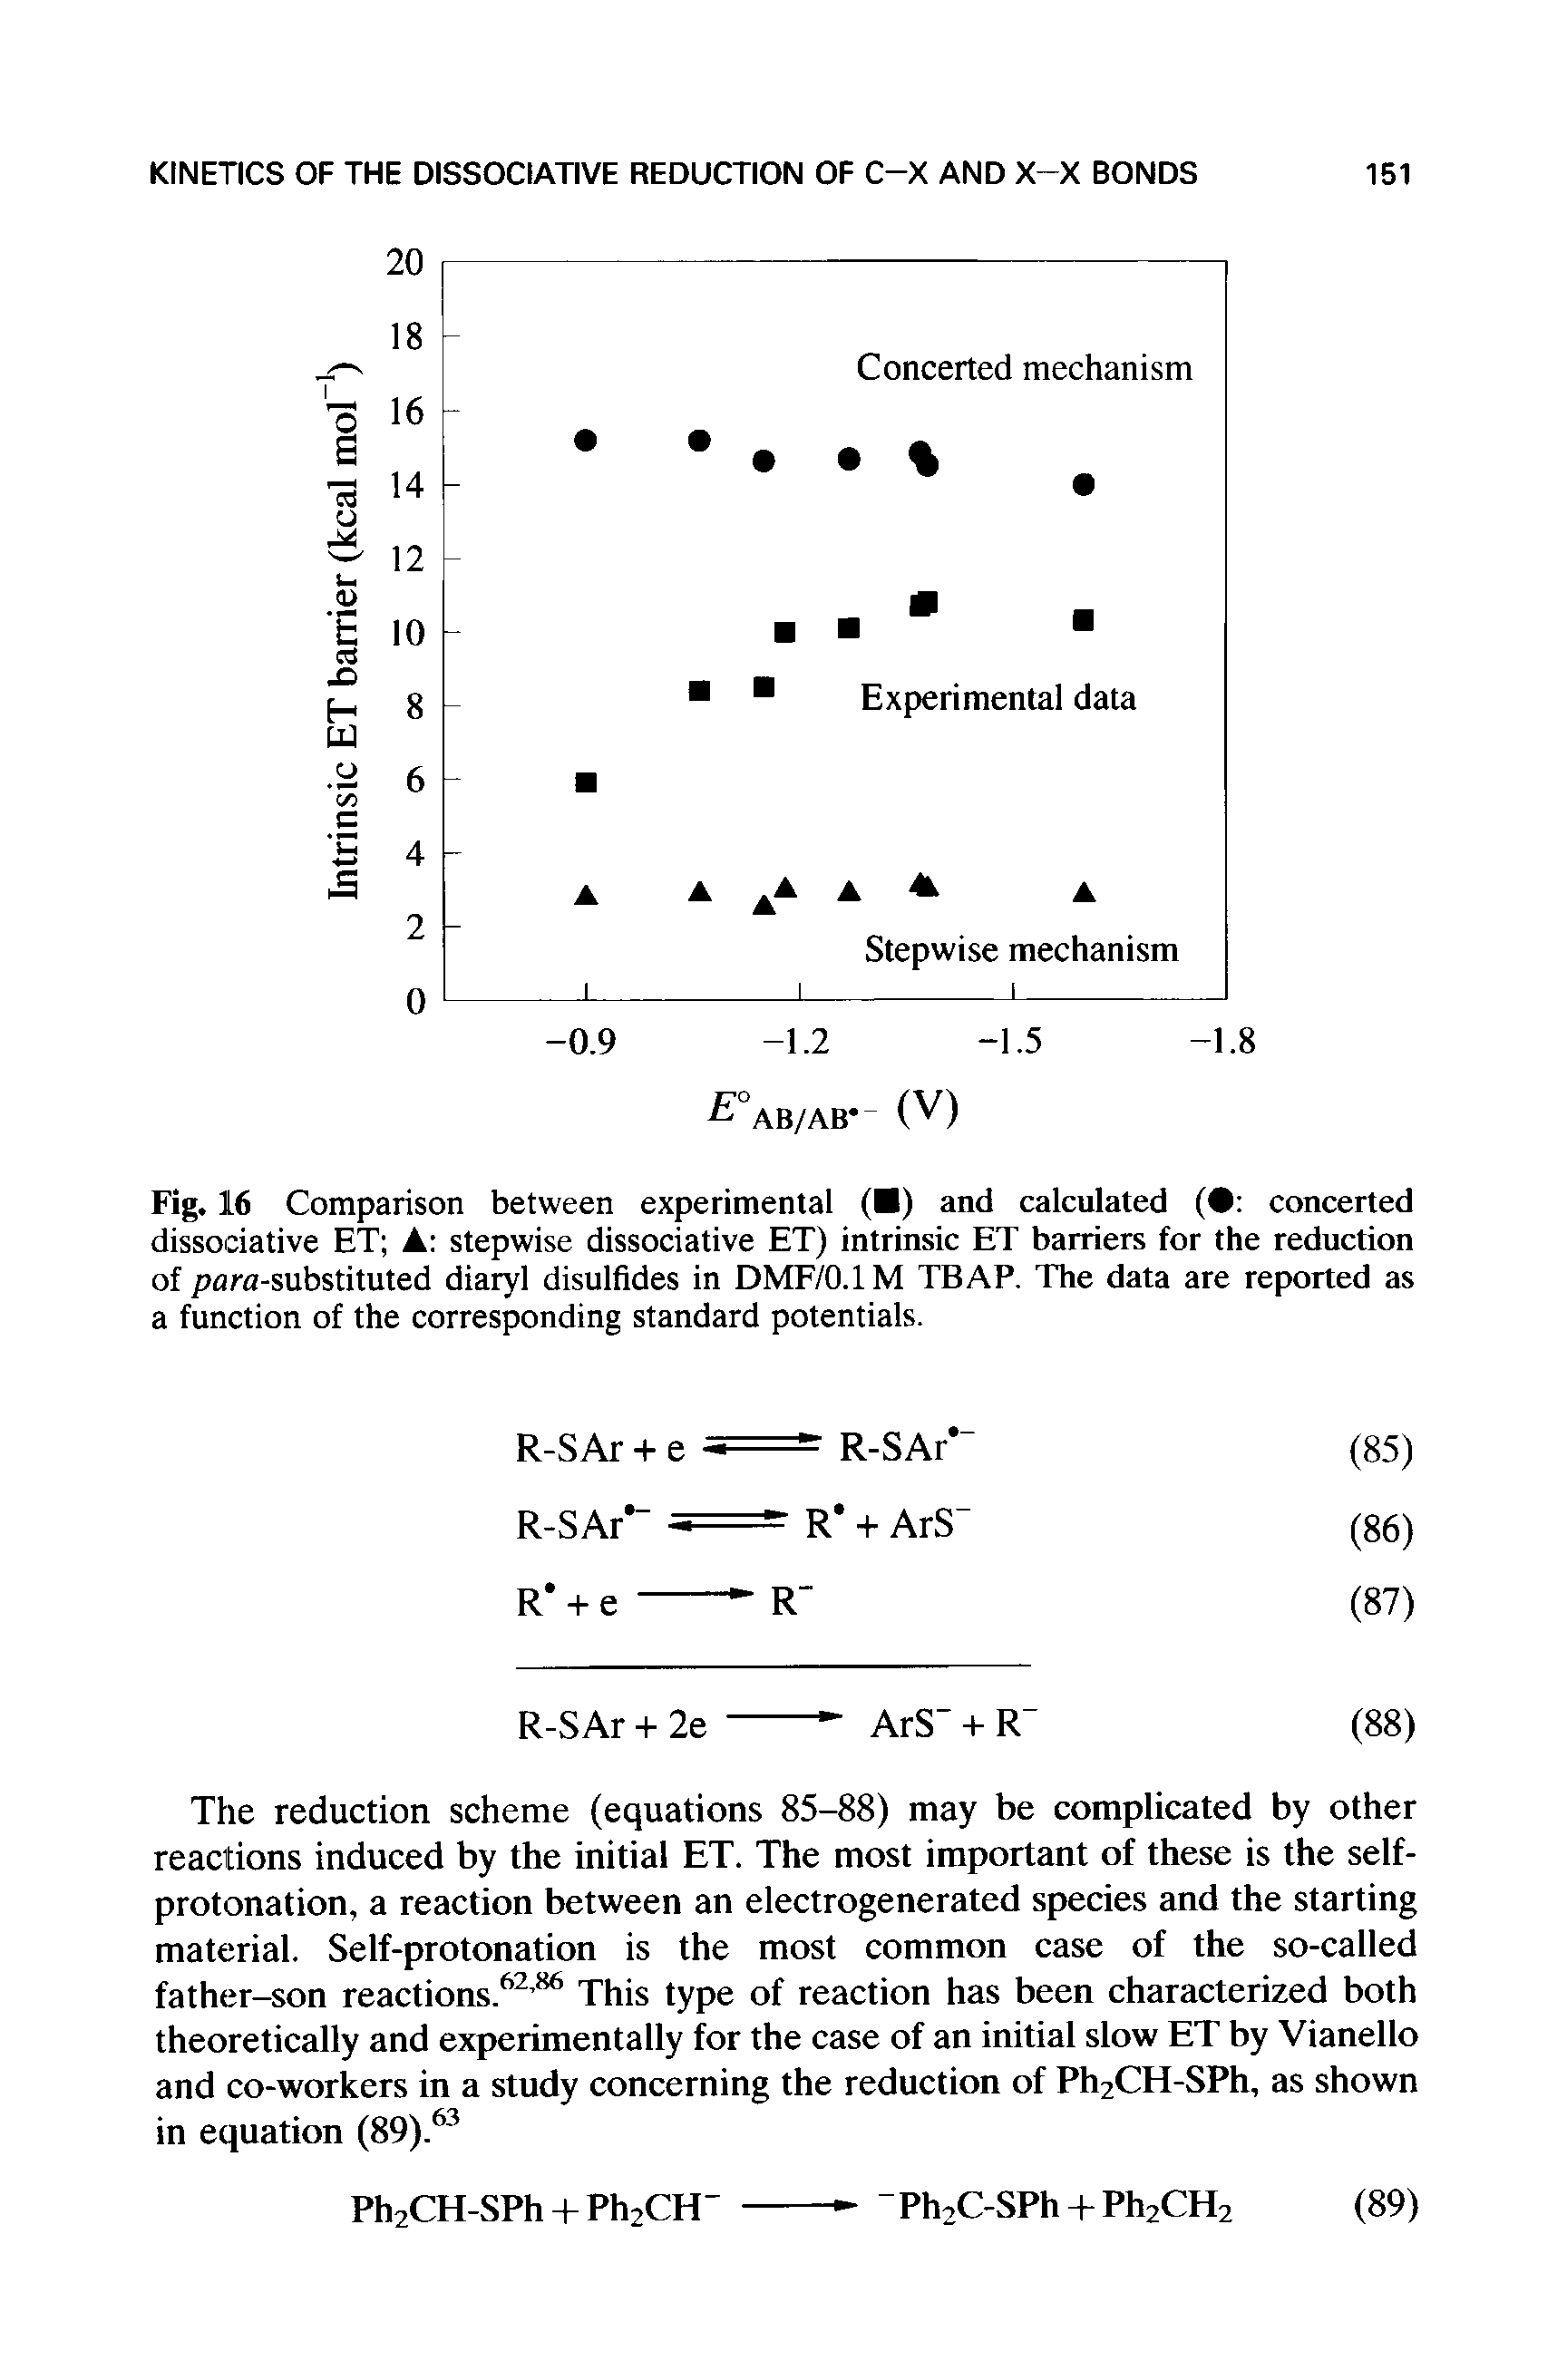 Fig. 16 Comparison between experimental ( ) and calculated ( concerted dissociative ET A stepwise dissociative ET) intrinsic ET barriers for the reduction of para-substituted diaryl disulfides in DMF/O.IM TBAP. The data are reported as a function of the corresponding standard potentials.